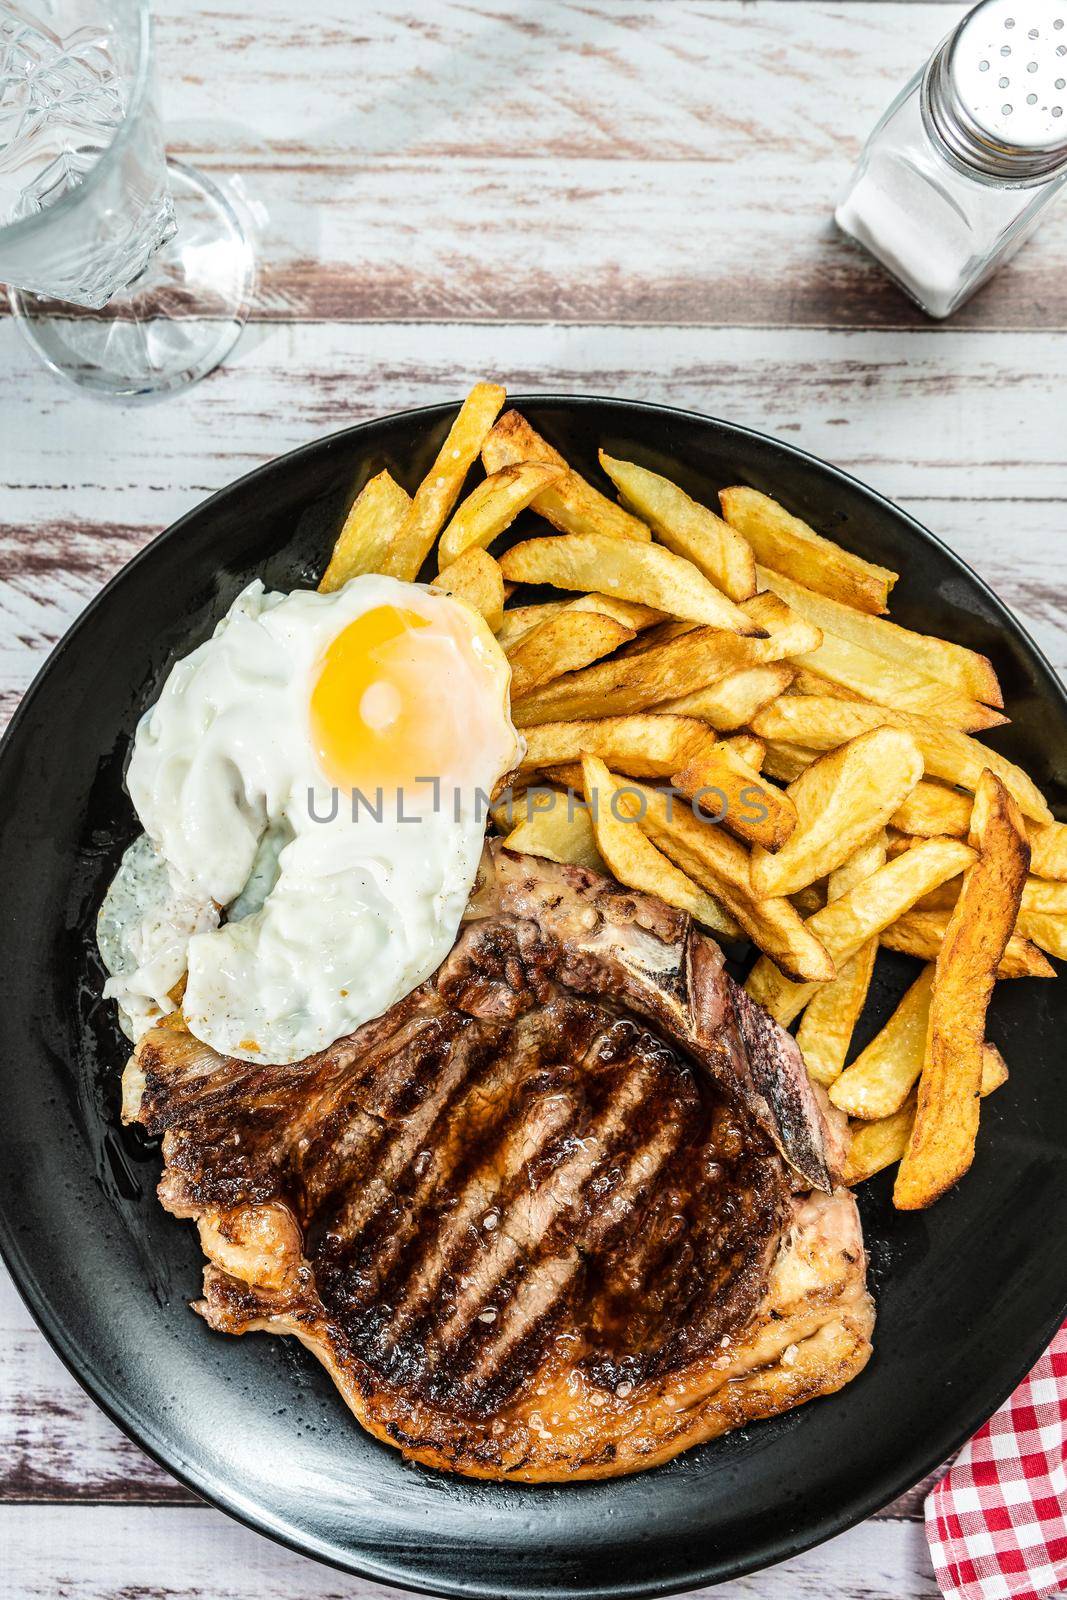 Plate with a juicy t-bone grilled or barbecued, accompanied by a portion of french fries and a fried egg. Top view. Traditional, homemade food concept. copy space.